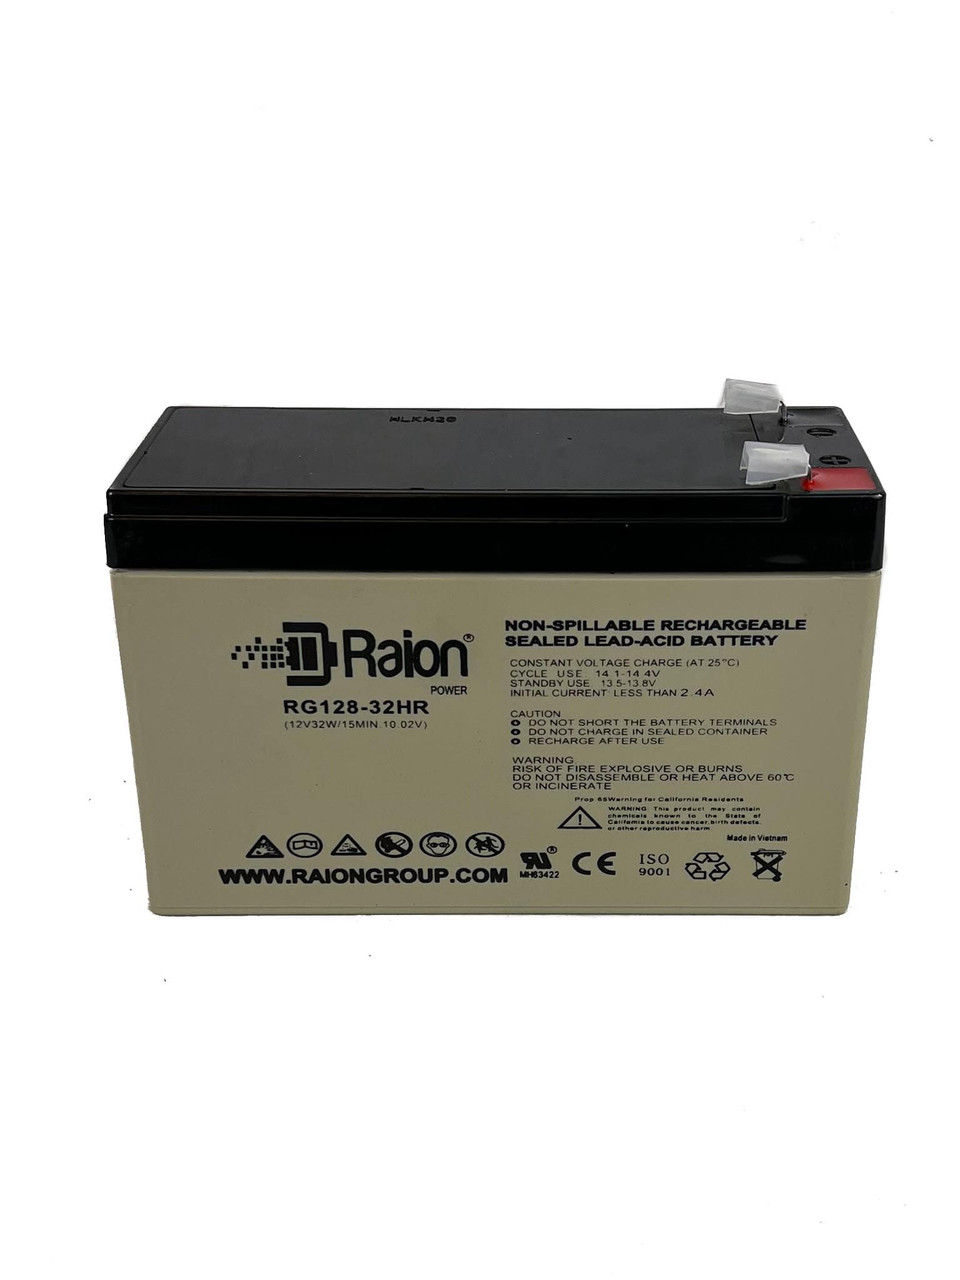 Raion Power RG128-32HR Replacement High Rate Battery Cartridge for CyberPower OFFICE POWER AVR 625AVR